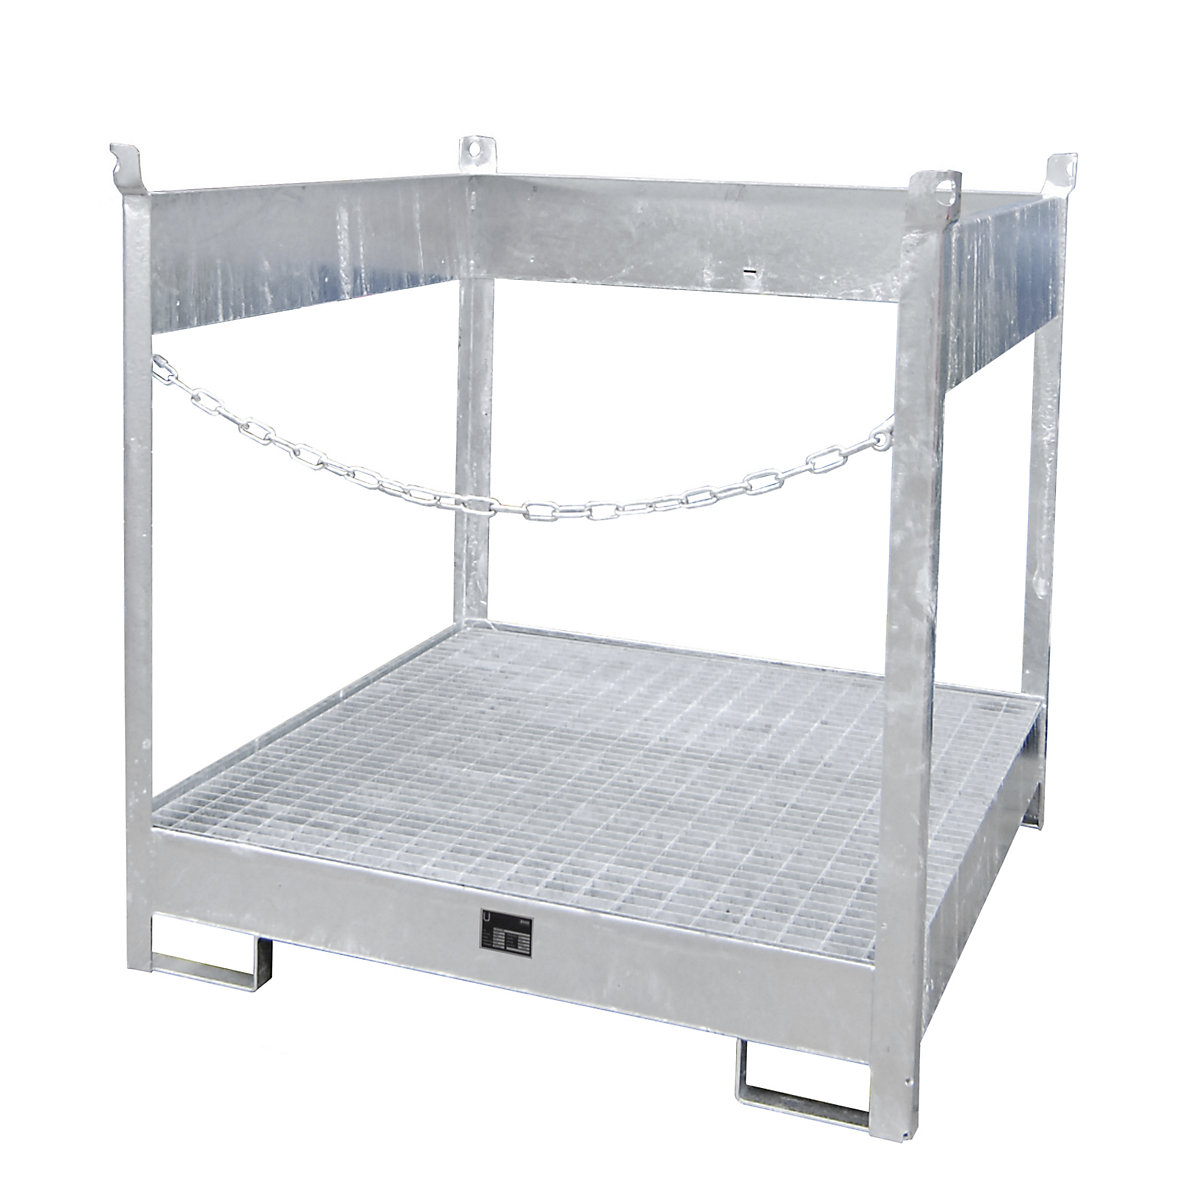 Storage and transport pallet with sump tray – eurokraft pro, open on all sides, stackable, for 4 drums, zinc plated-6